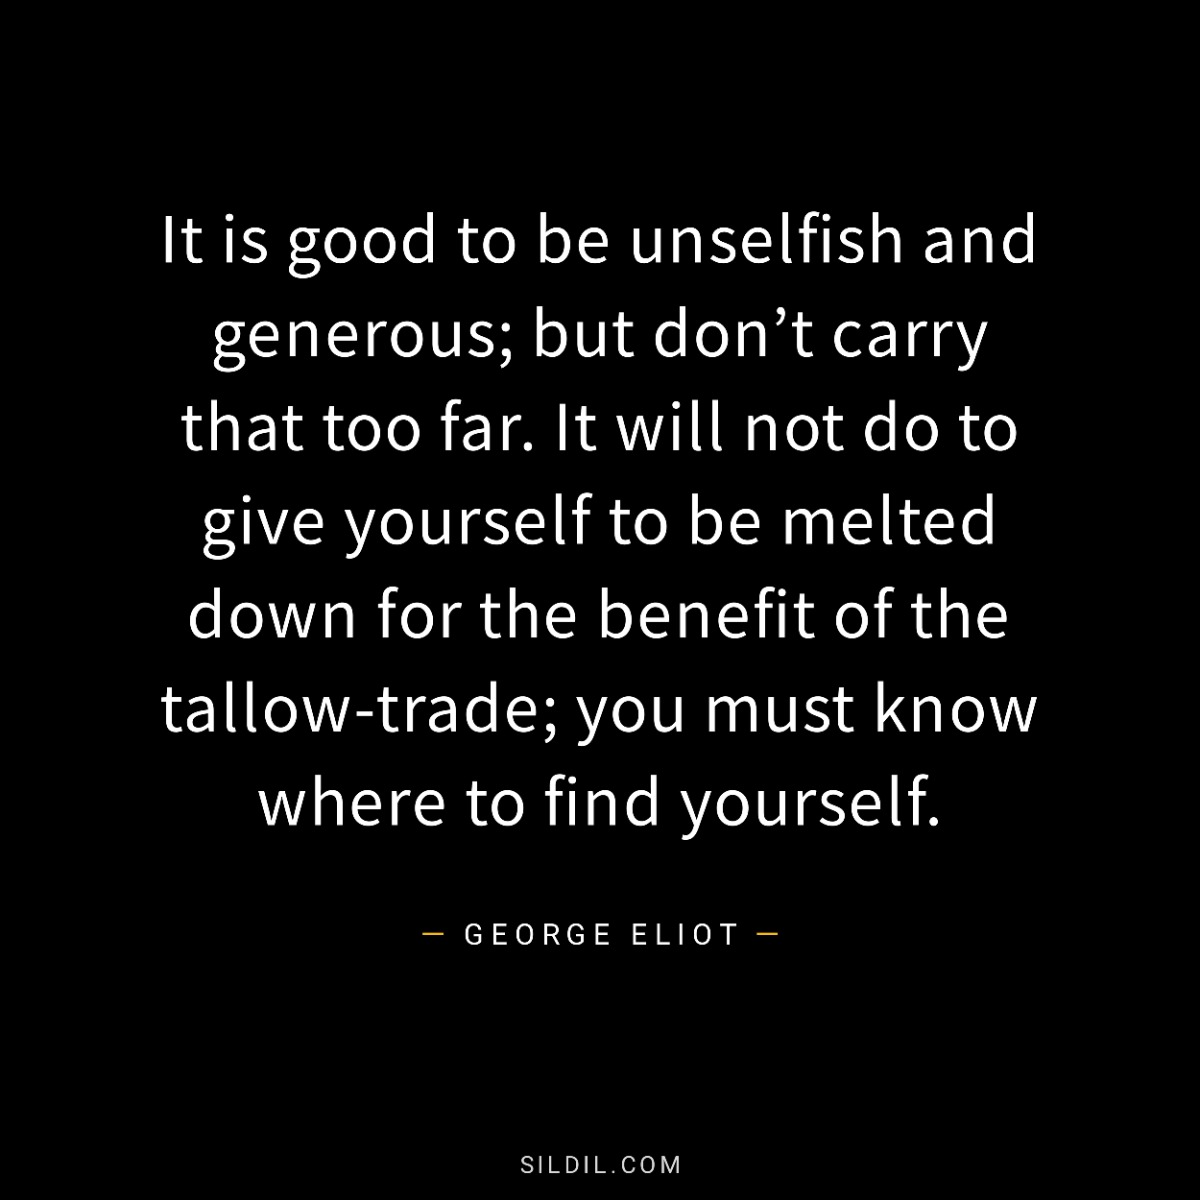 It is good to be unselfish and generous; but don’t carry that too far. It will not do to give yourself to be melted down for the benefit of the tallow-trade; you must know where to find yourself.